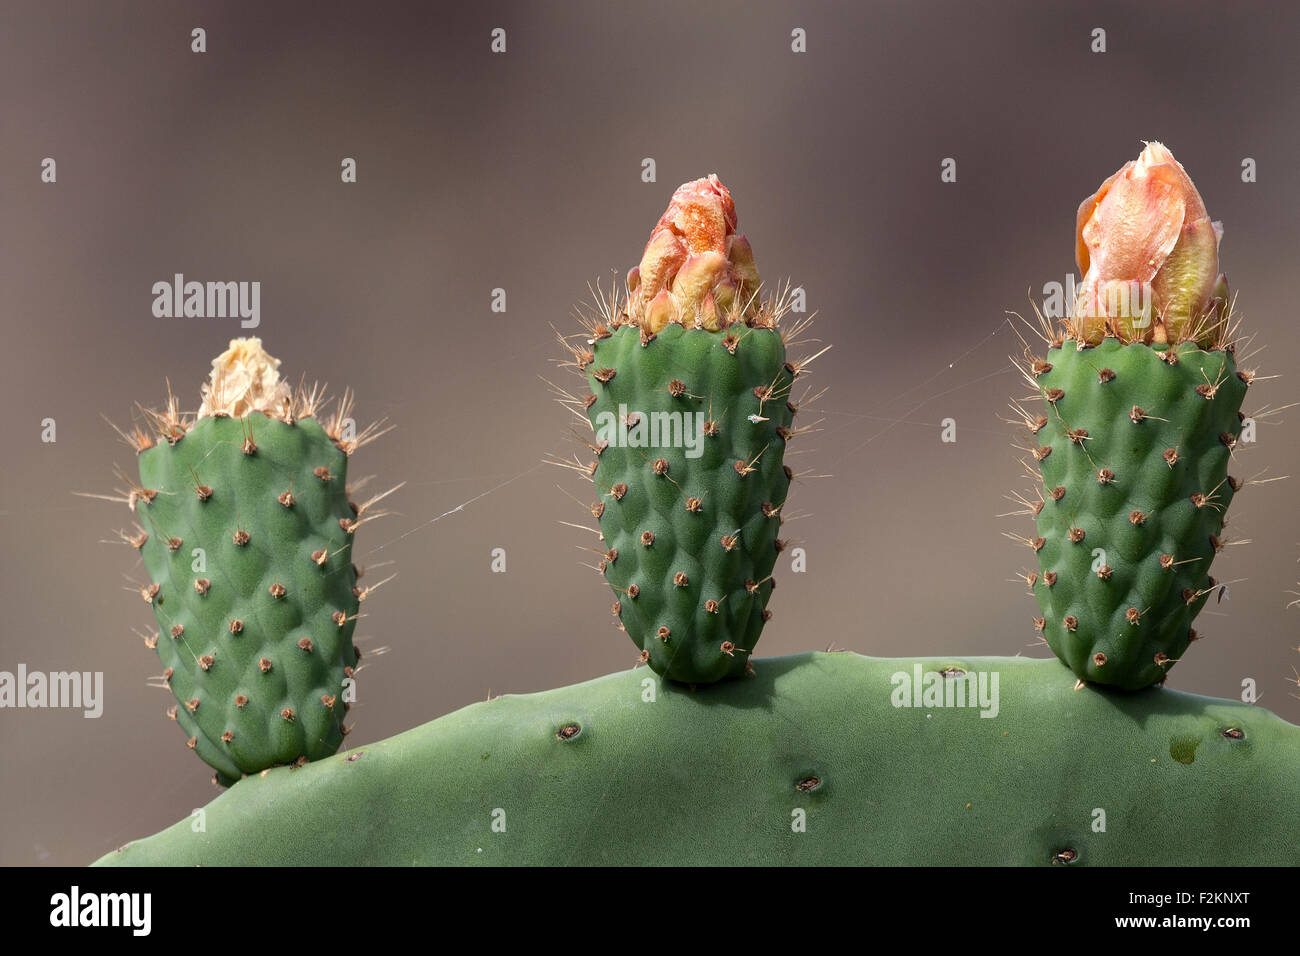 Prickly pear cactus (Opuntia ficus-indica), Opuntia, prickly pear with fruit growing, Gran Canaria, Kanaische Islands, Spain Stock Photo